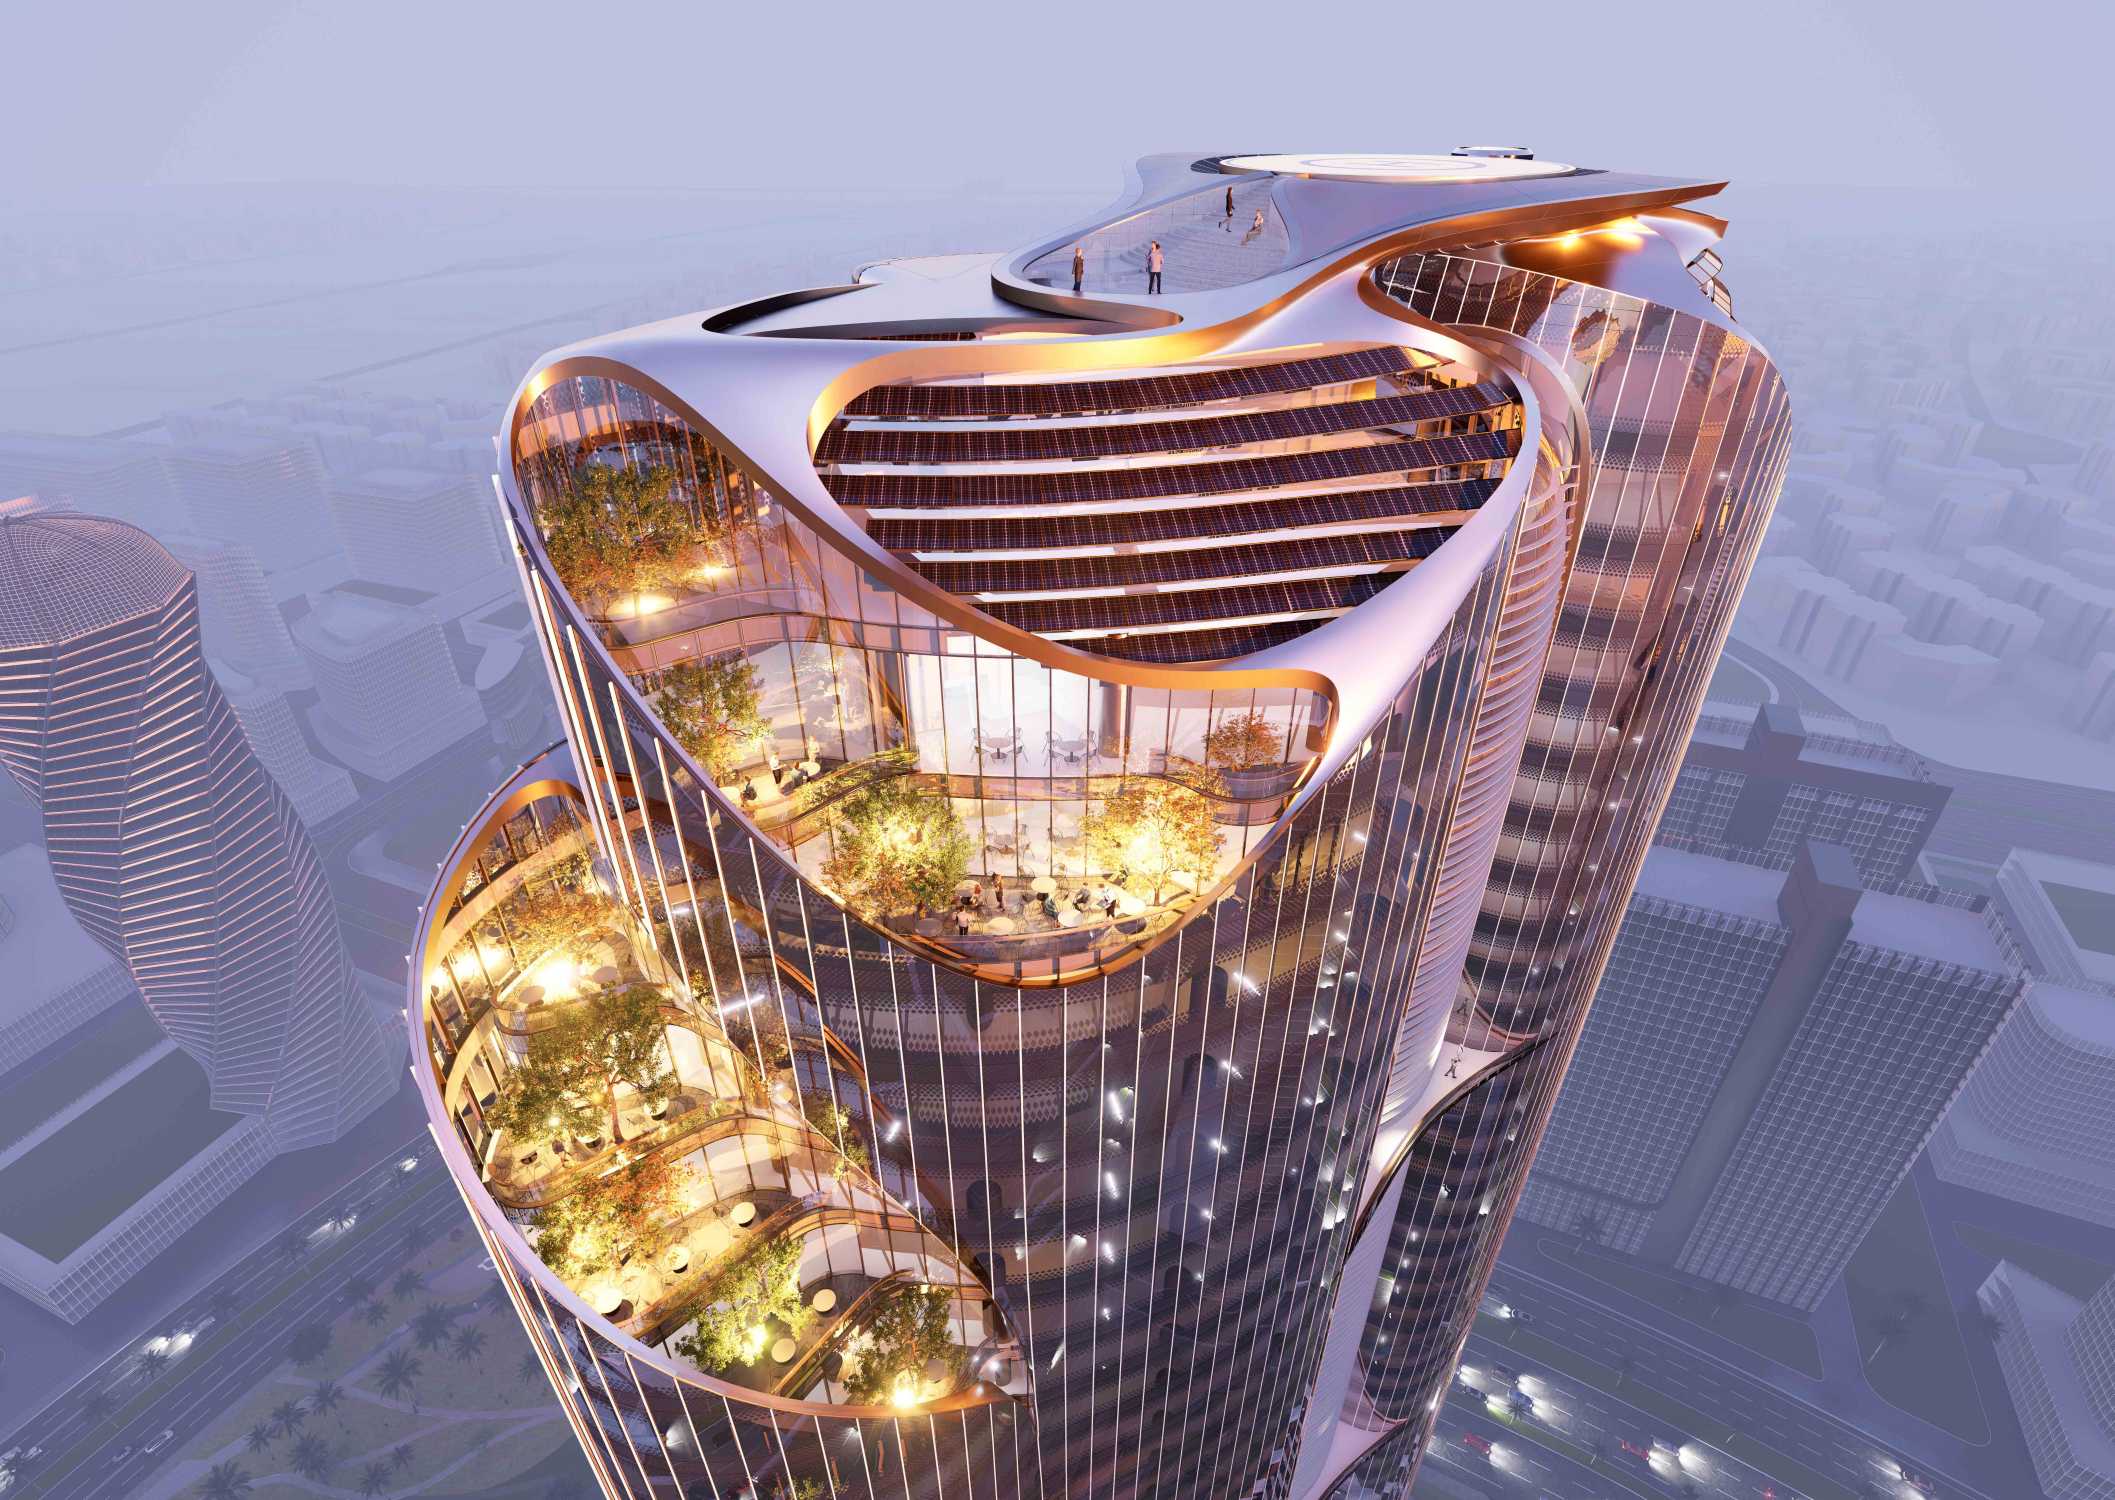 Designworks is creating the user experience design for the Forbes International Tower.